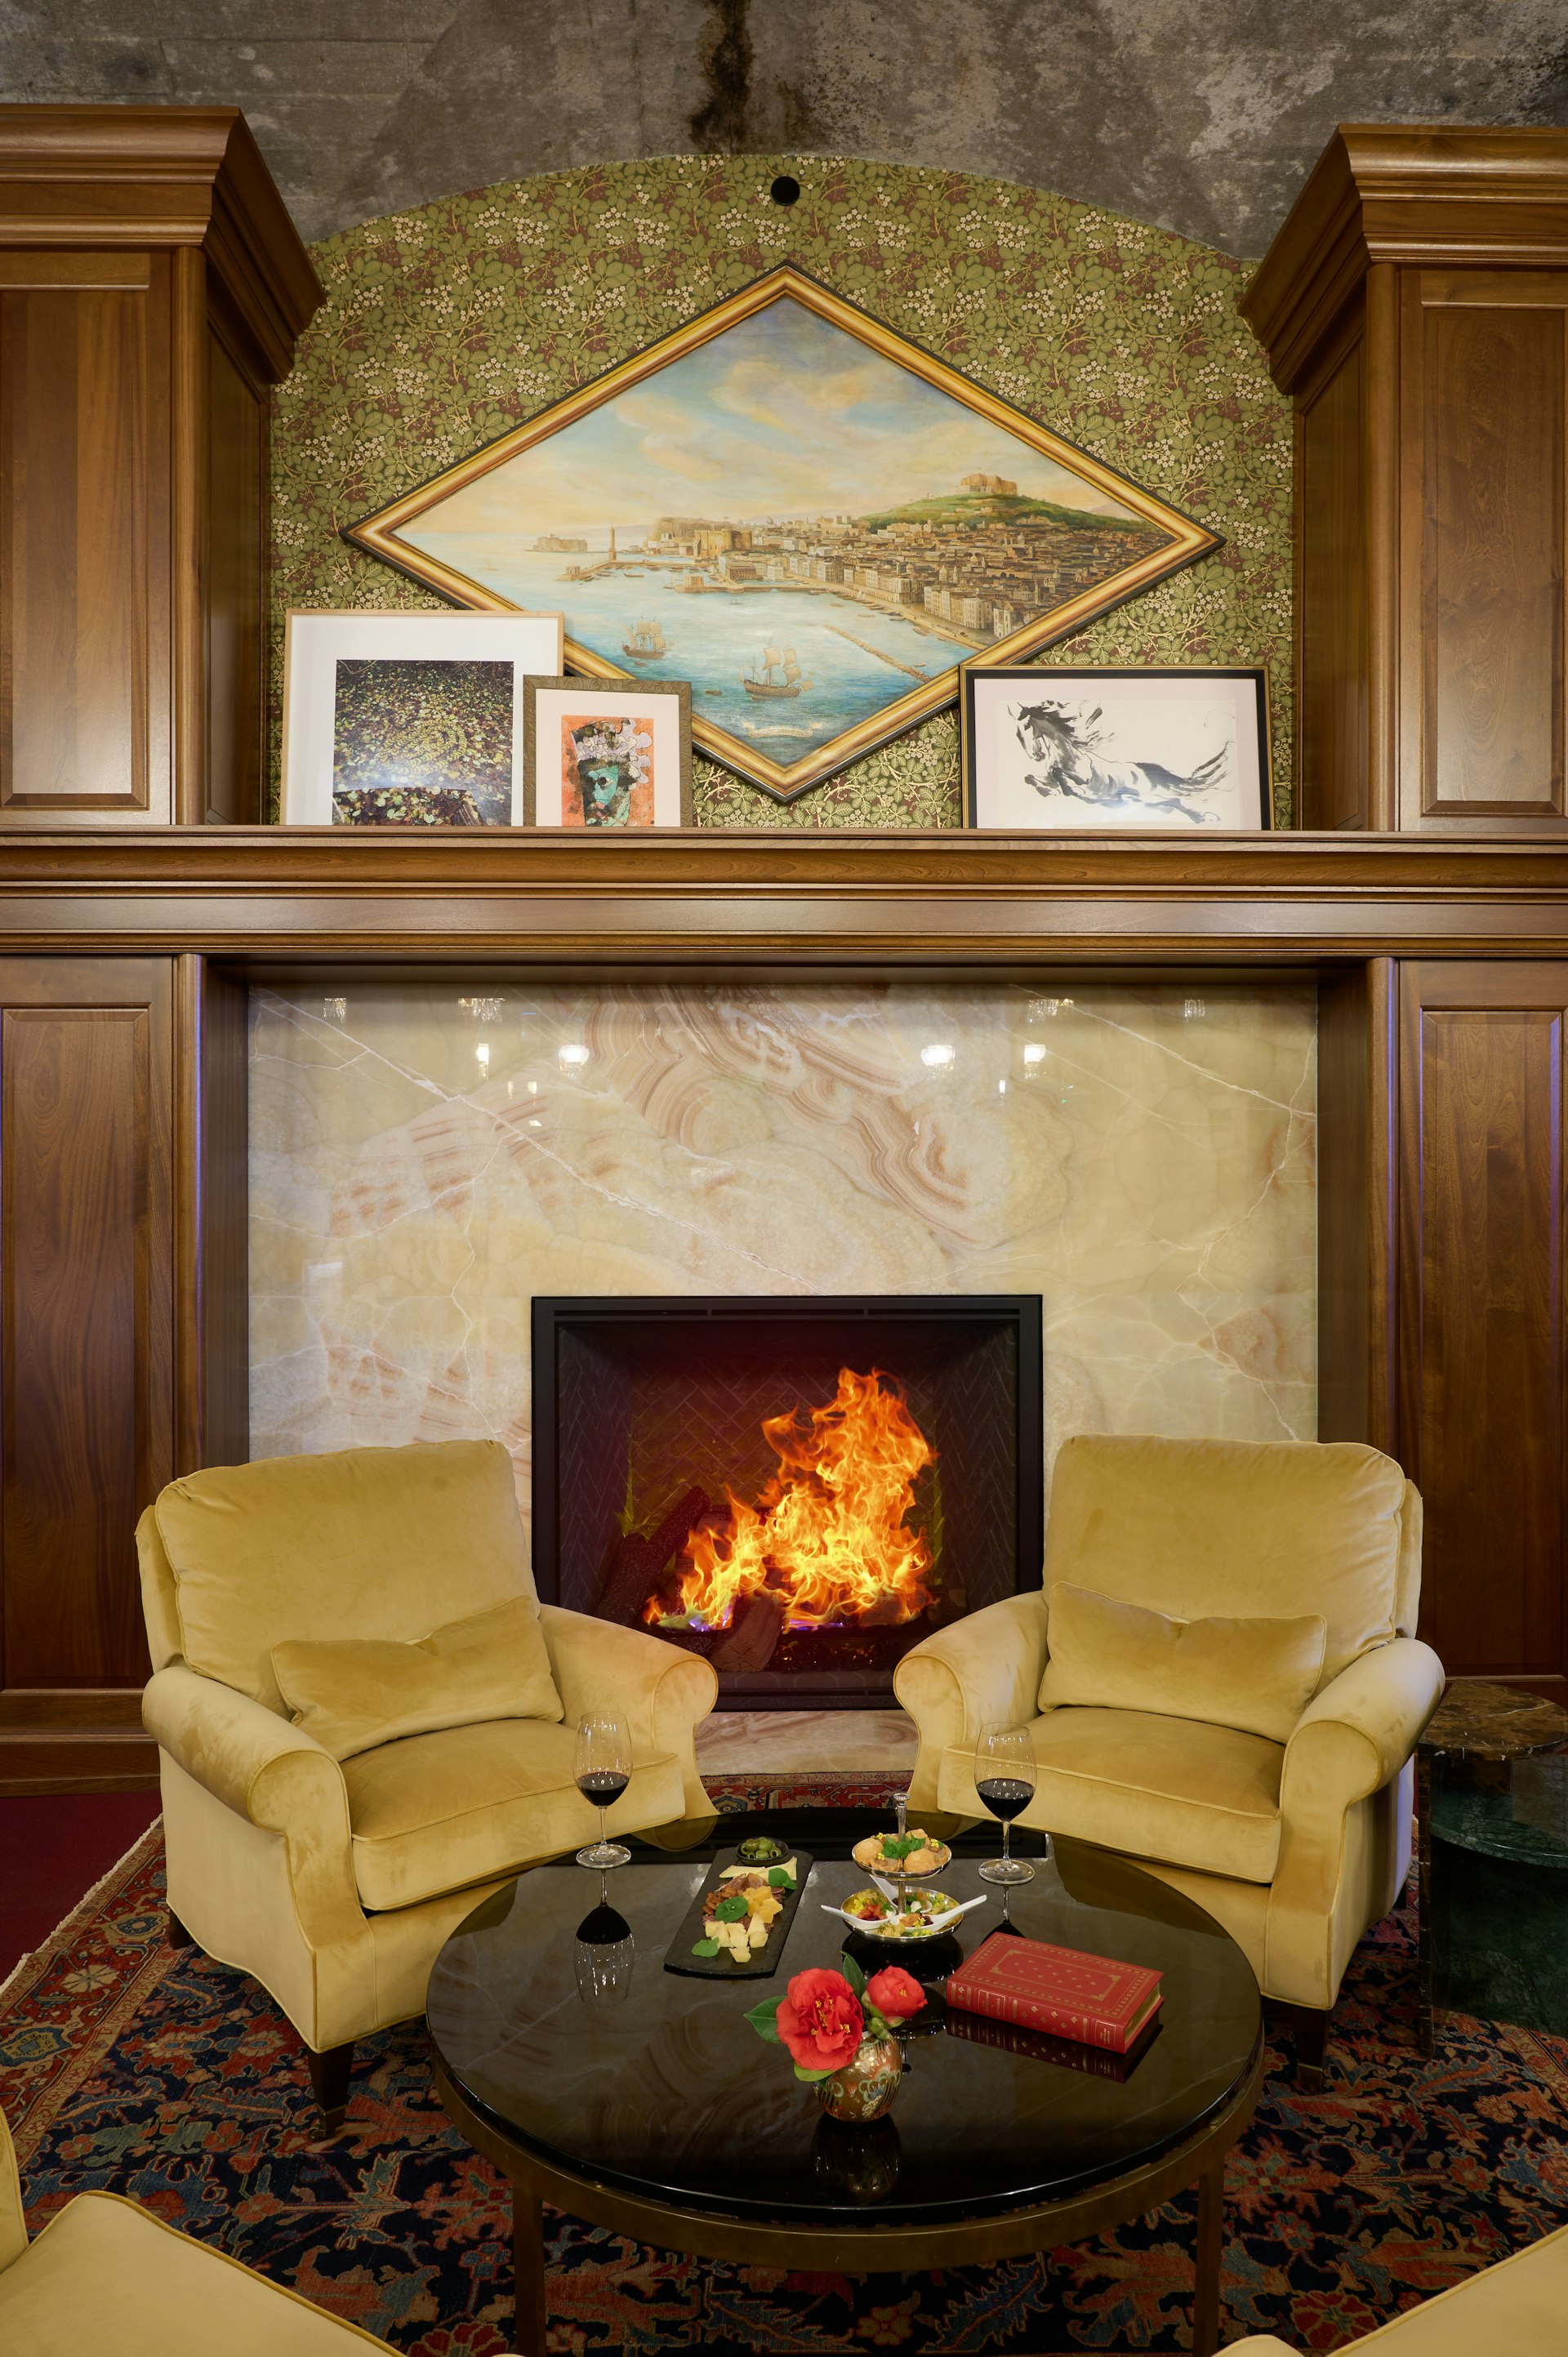 Two leather armchairs in front of a fireplace. There is food and wine on the table.